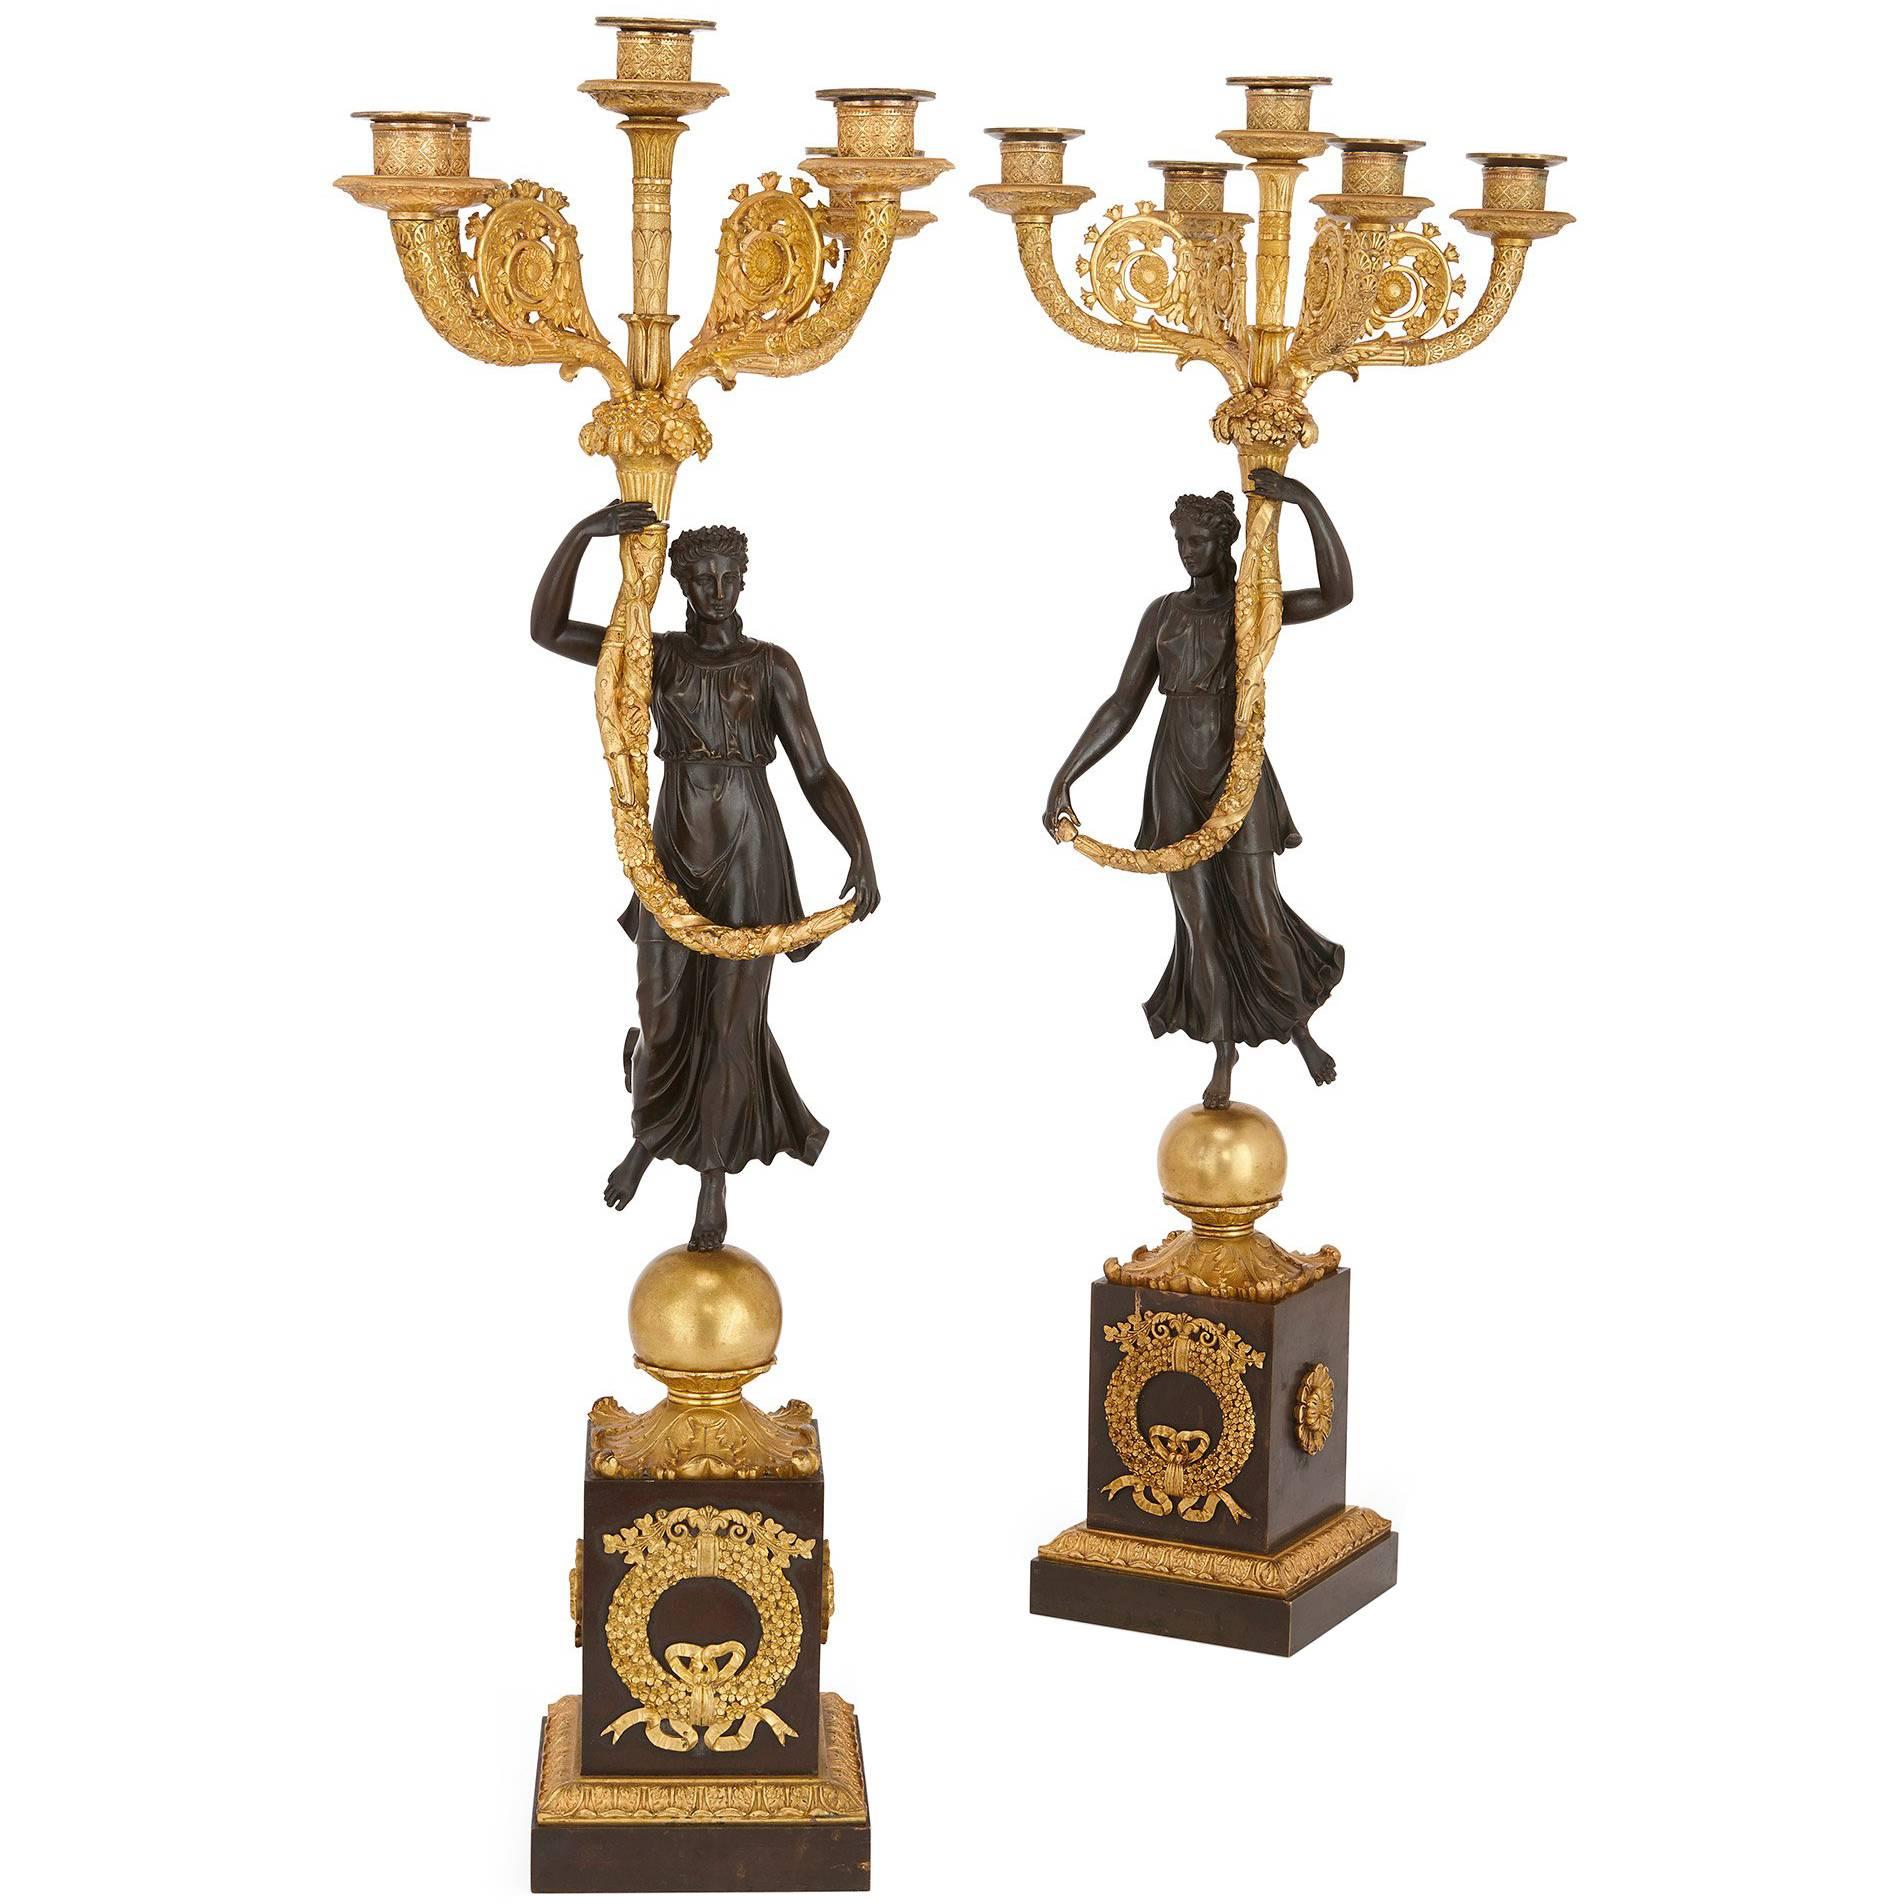 Pair of Antique French Empire Period Ormolu and Patinated Bronze Candelabra